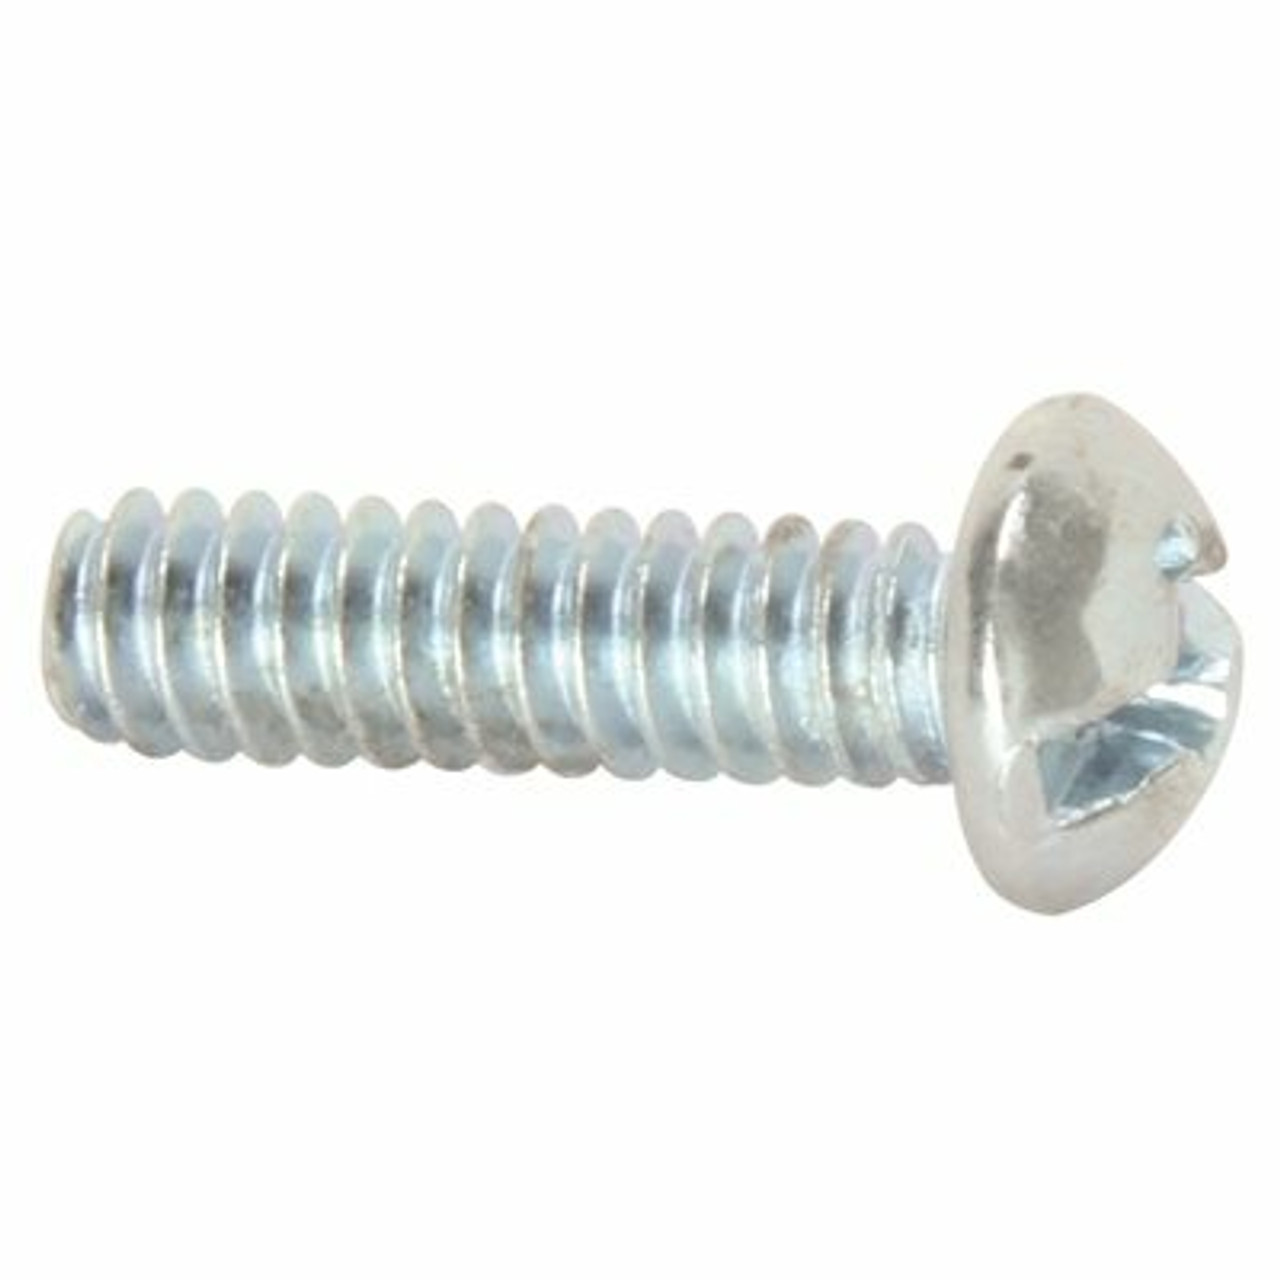 Lindstrom #10-24 Tpi X 2 In. Combo Phillips/Slotted Round Machine Screws (100 Per Pack)